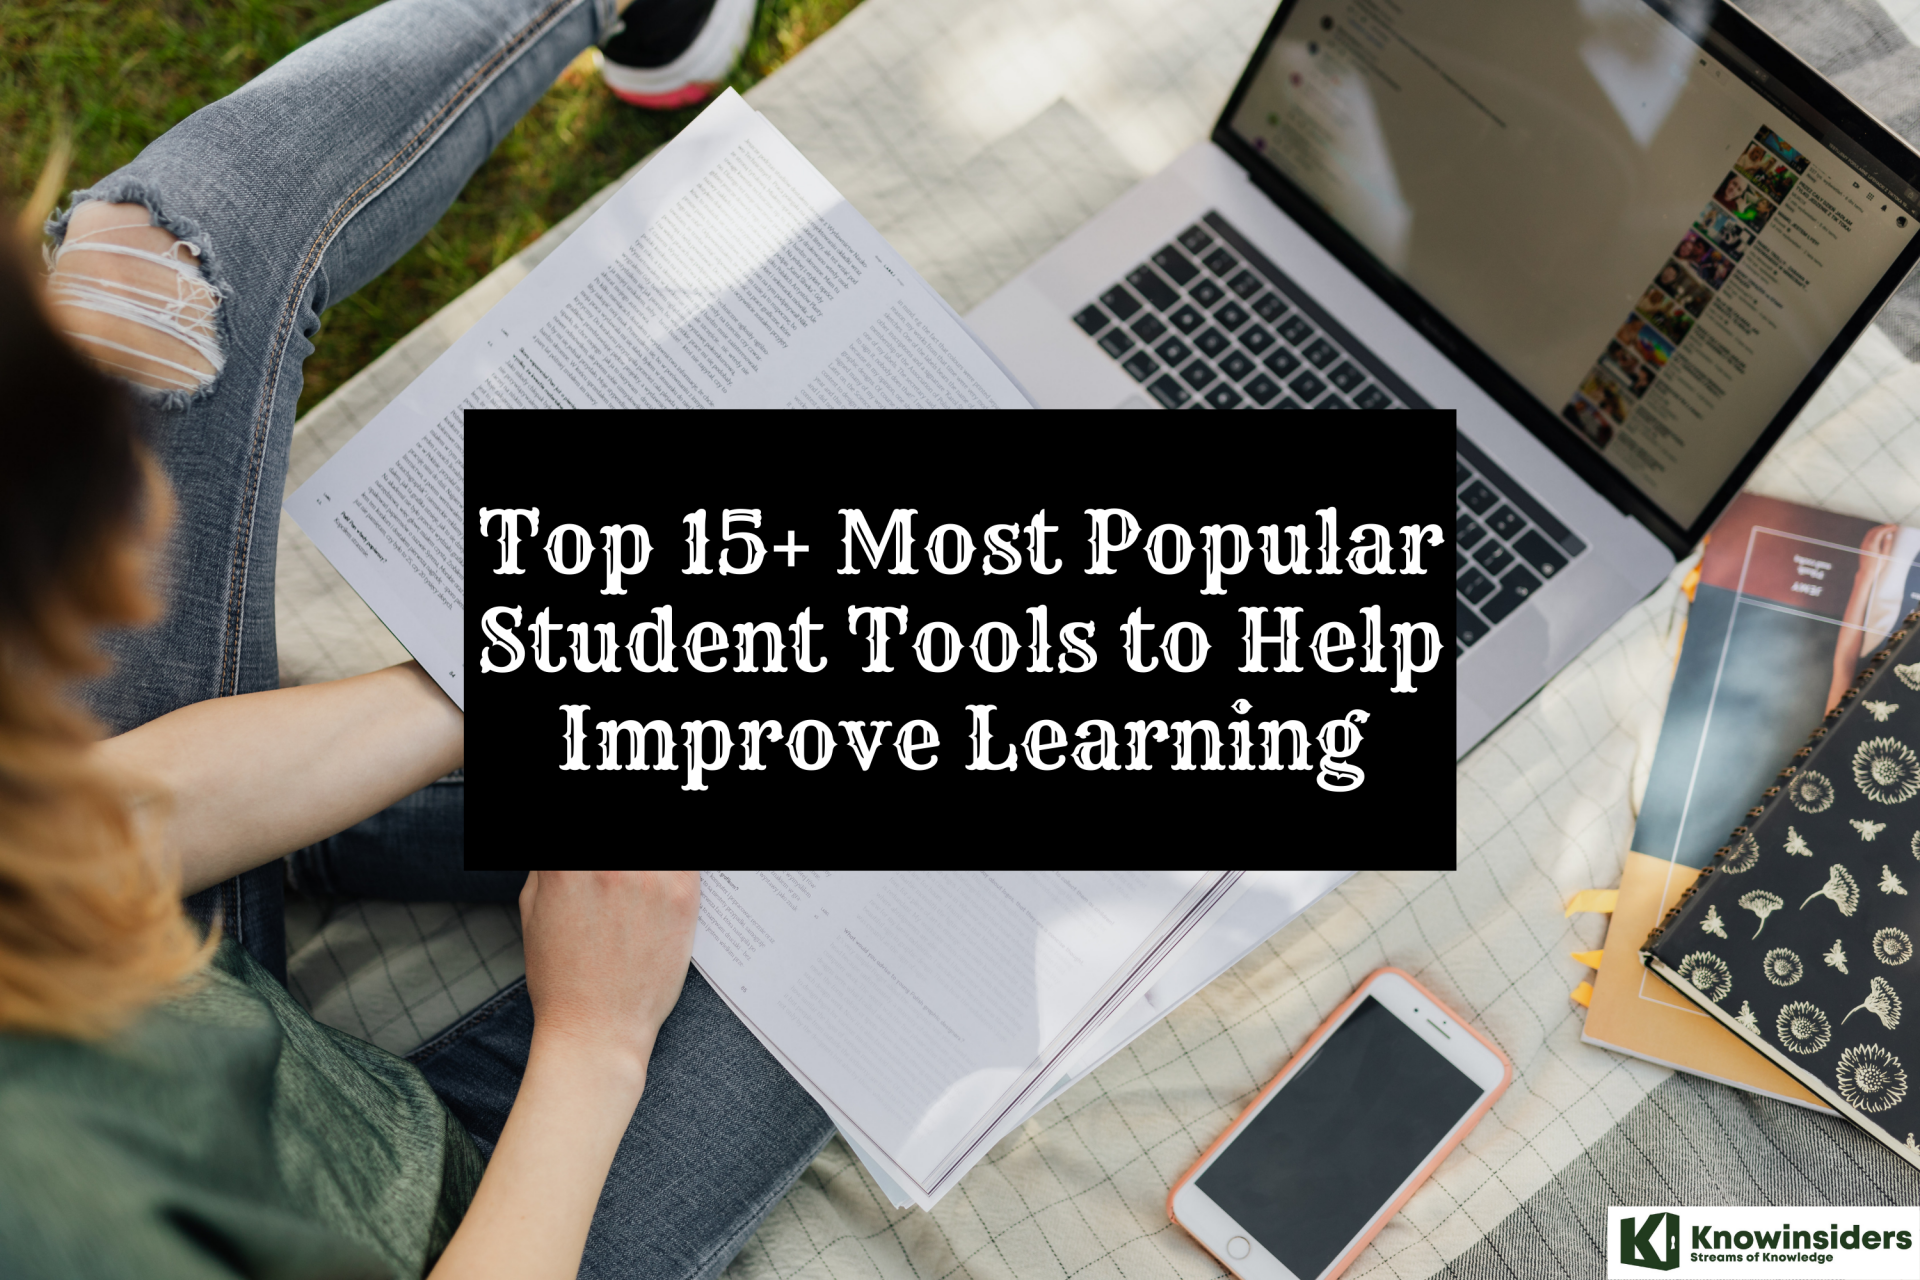 Top 15+ Most Popular Student Tools to Help Improve Learning